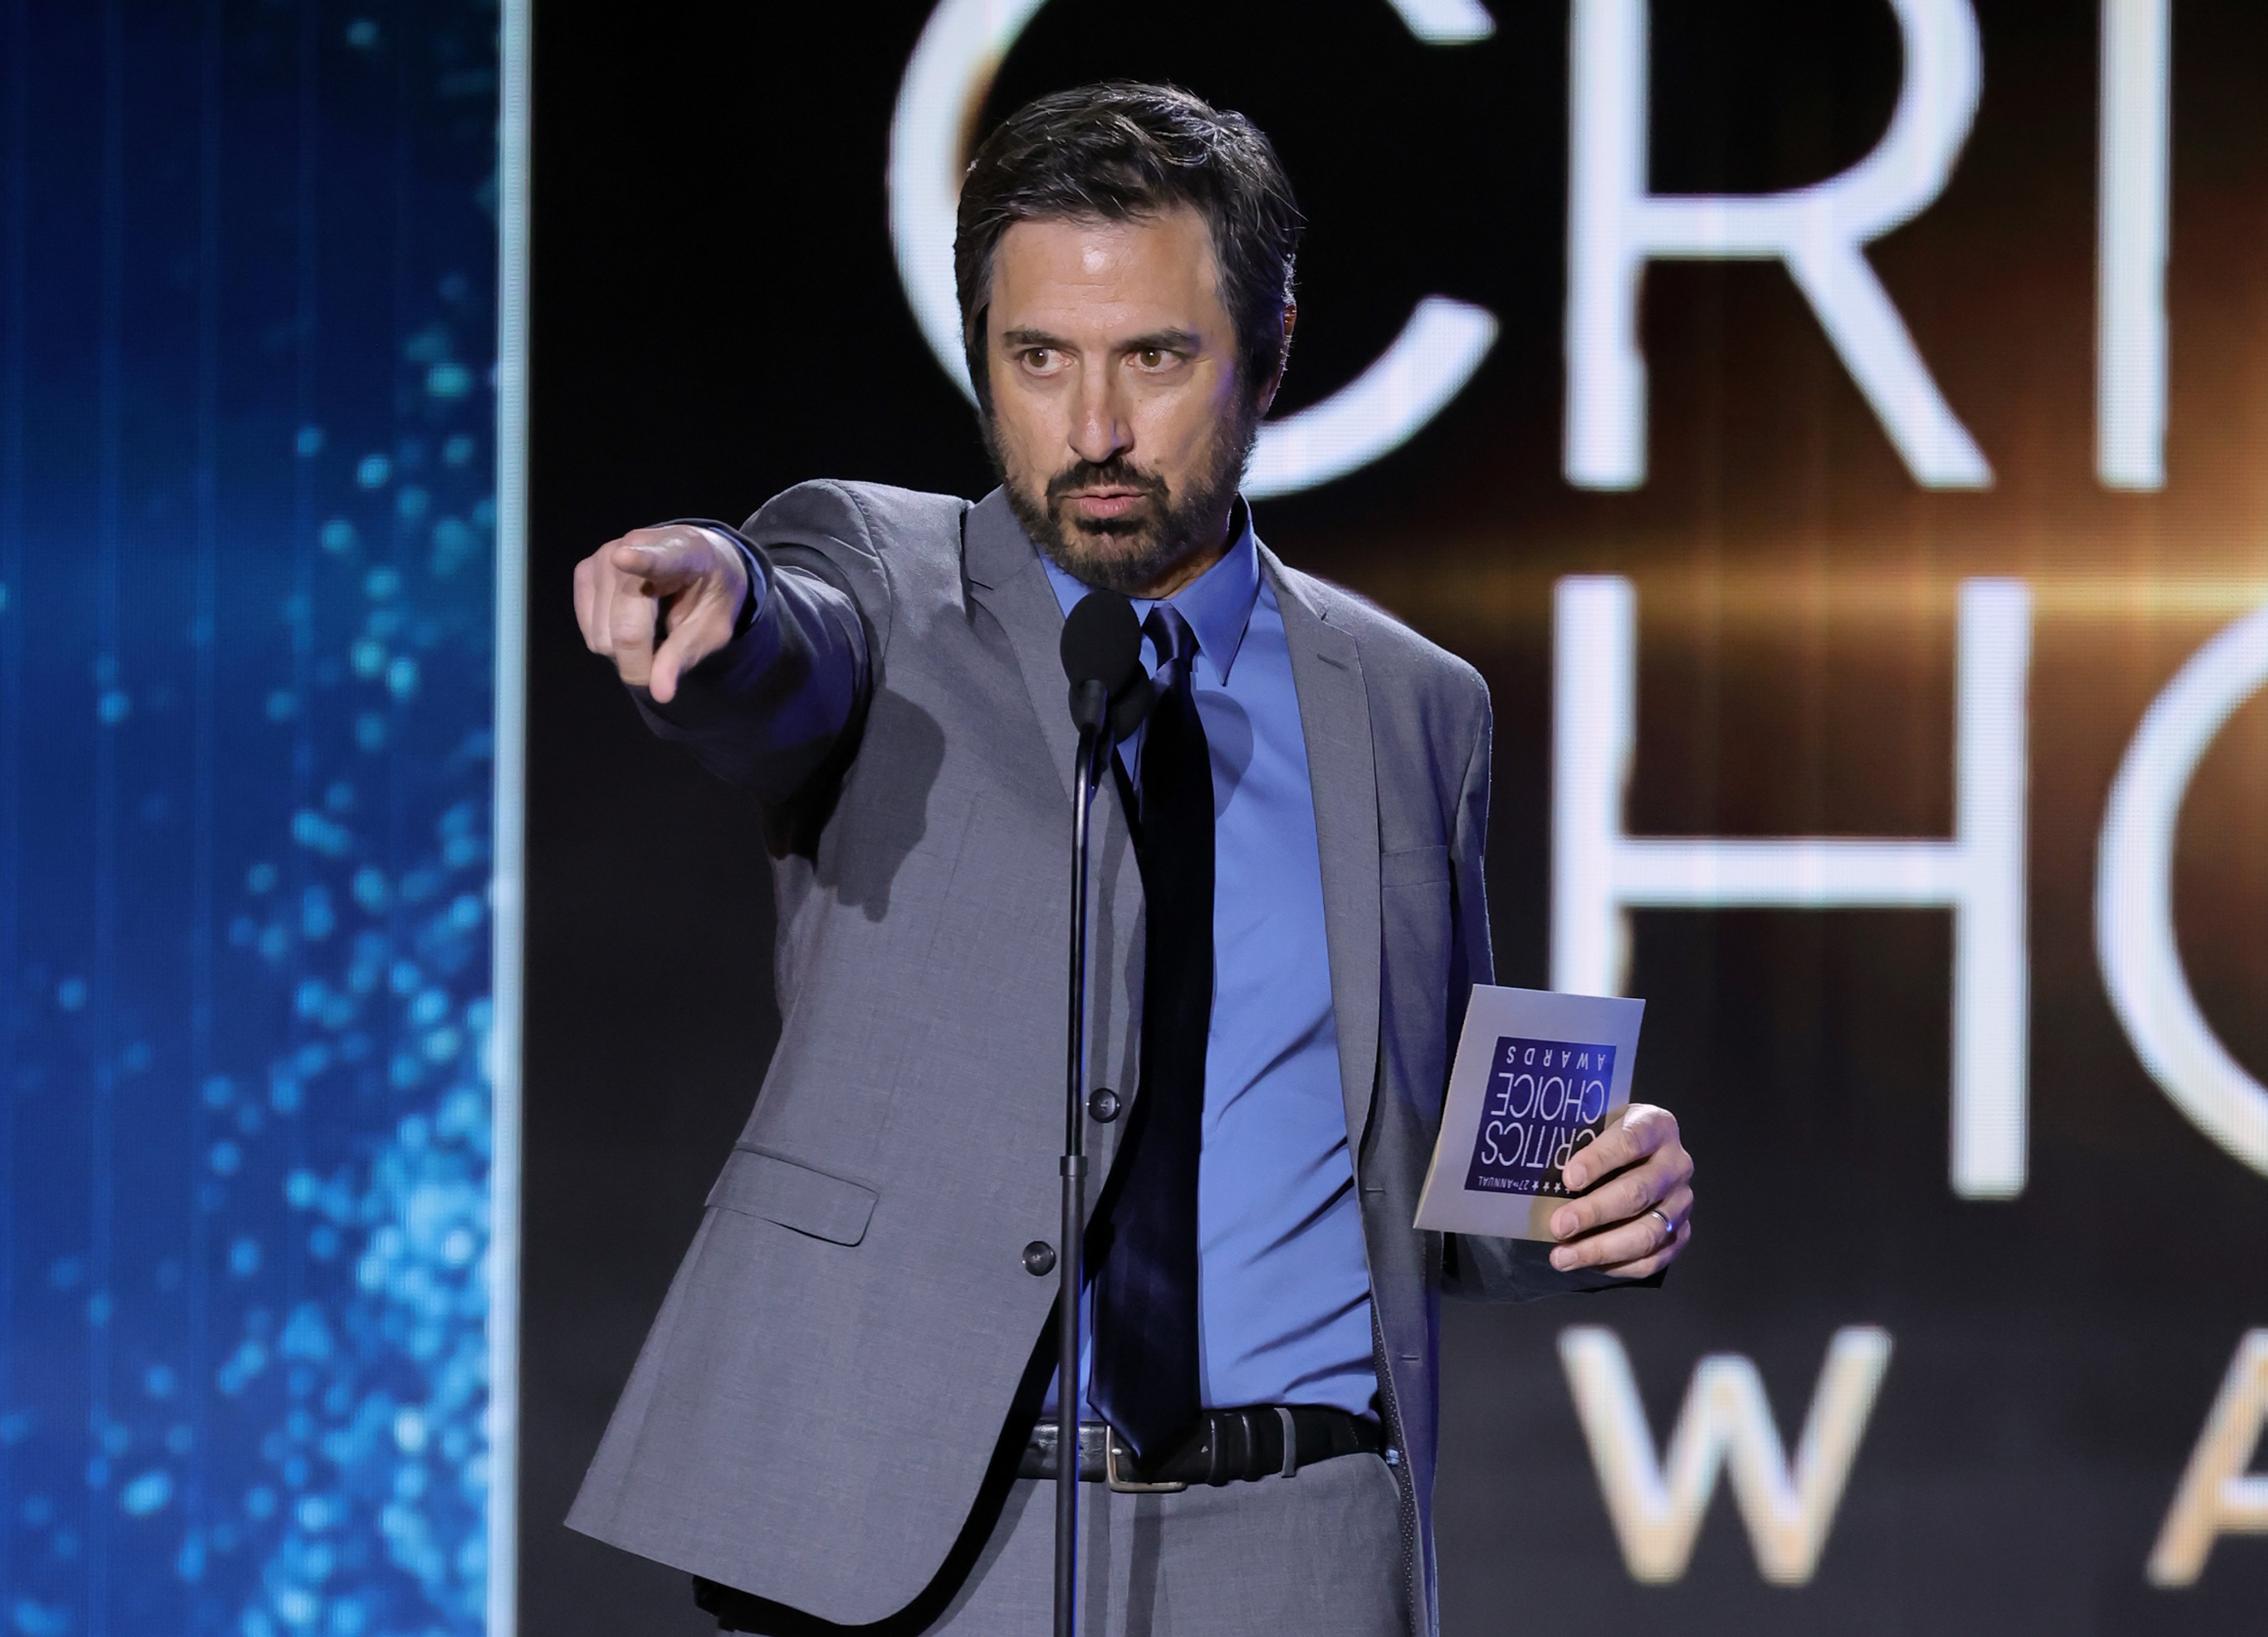 Ray Romano during the 27th Annual Critics Choice Awards at Fairmont Century Plaza on March 13, 2022, in Los Angeles, California | Source: Getty Images